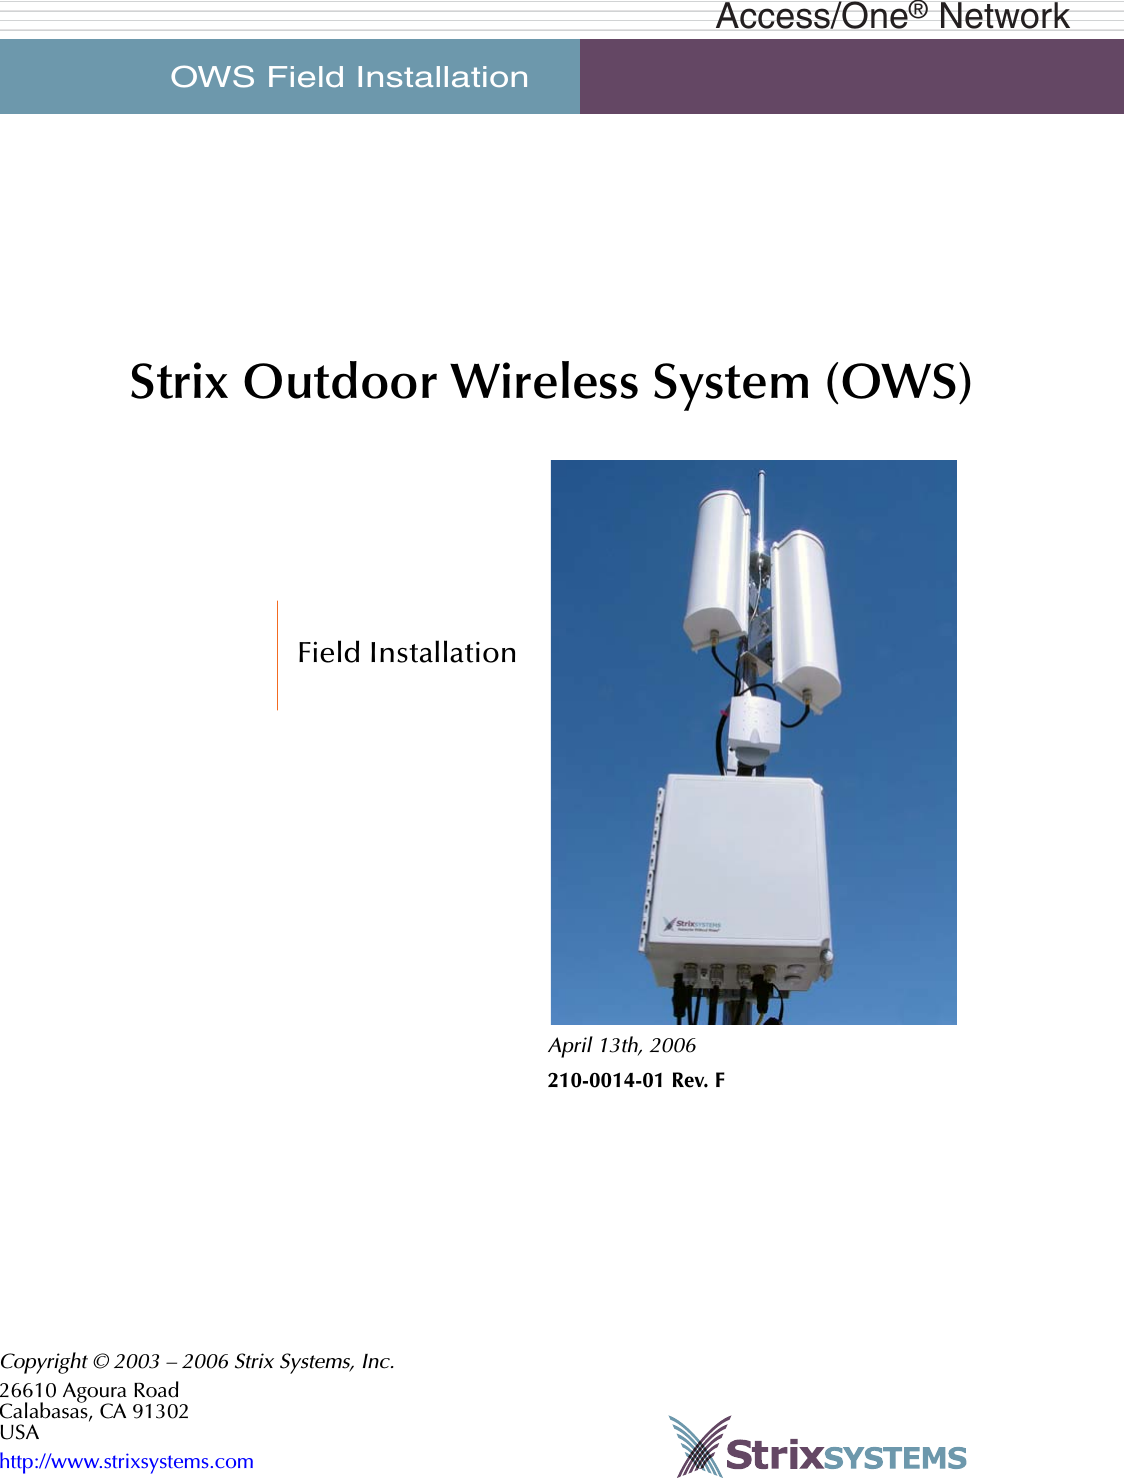 OWS Field Installation     Access/One® NetworkStrix Outdoor Wireless System (OWS)Field InstallationApril 13th, 2006210-0014-01 Rev. FCopyright © 2003 – 2006 Strix Systems, Inc.26610 Agoura RoadCalabasas, CA 91302USAhttp://www.strixsystems.com